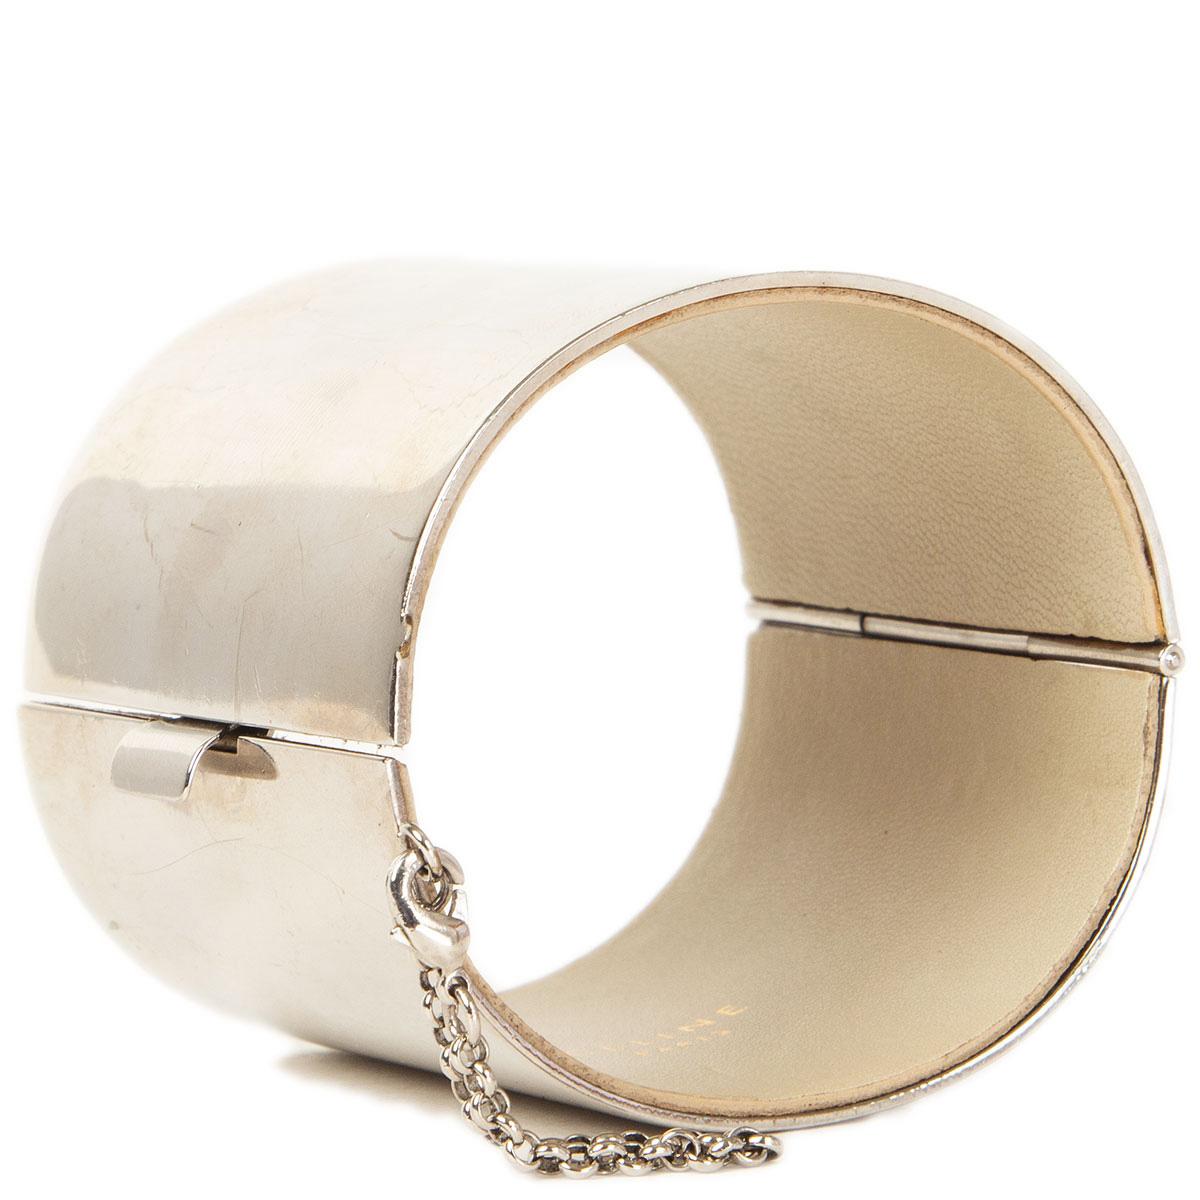 100% authentic Céline wide manchette cuff bracelet in silver-tone metal lined with light taupe lambskin. Has been worn and the little chain detail is broken on one side and now only attached to one side. Bracelet shows some wear and scratches